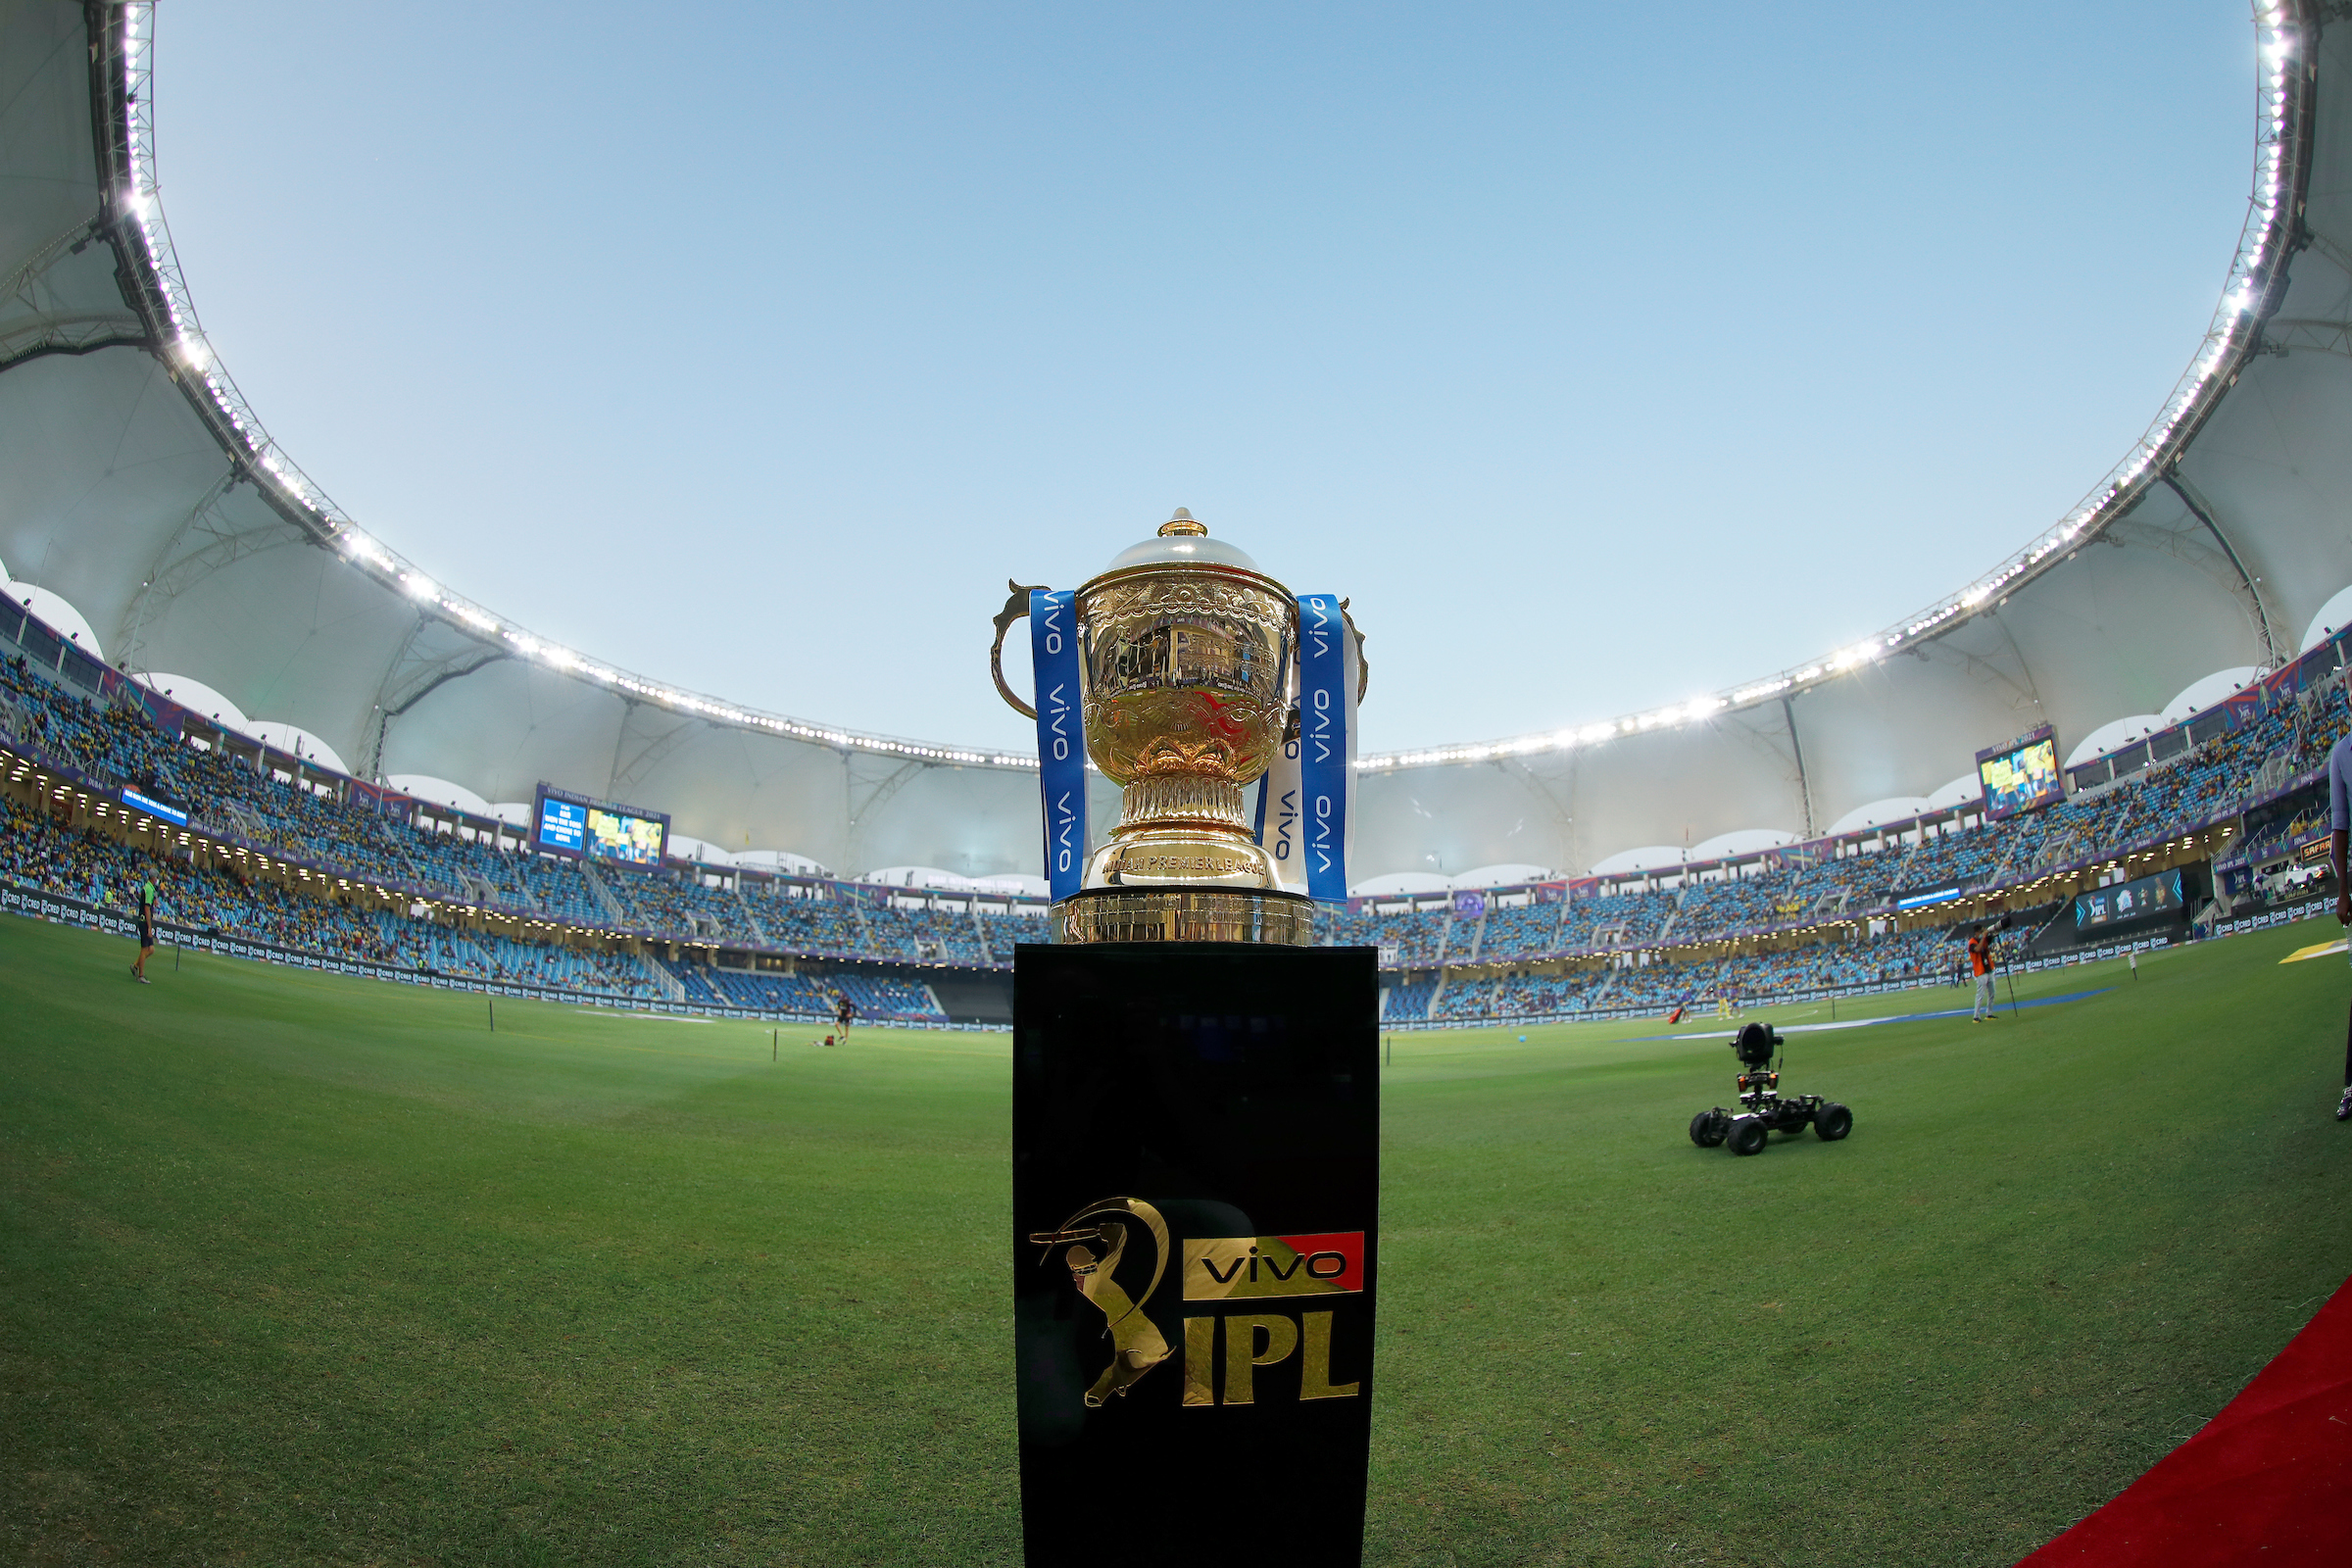 CSA has cheaper proposal for BCCI to stage IPL 2022: Reports